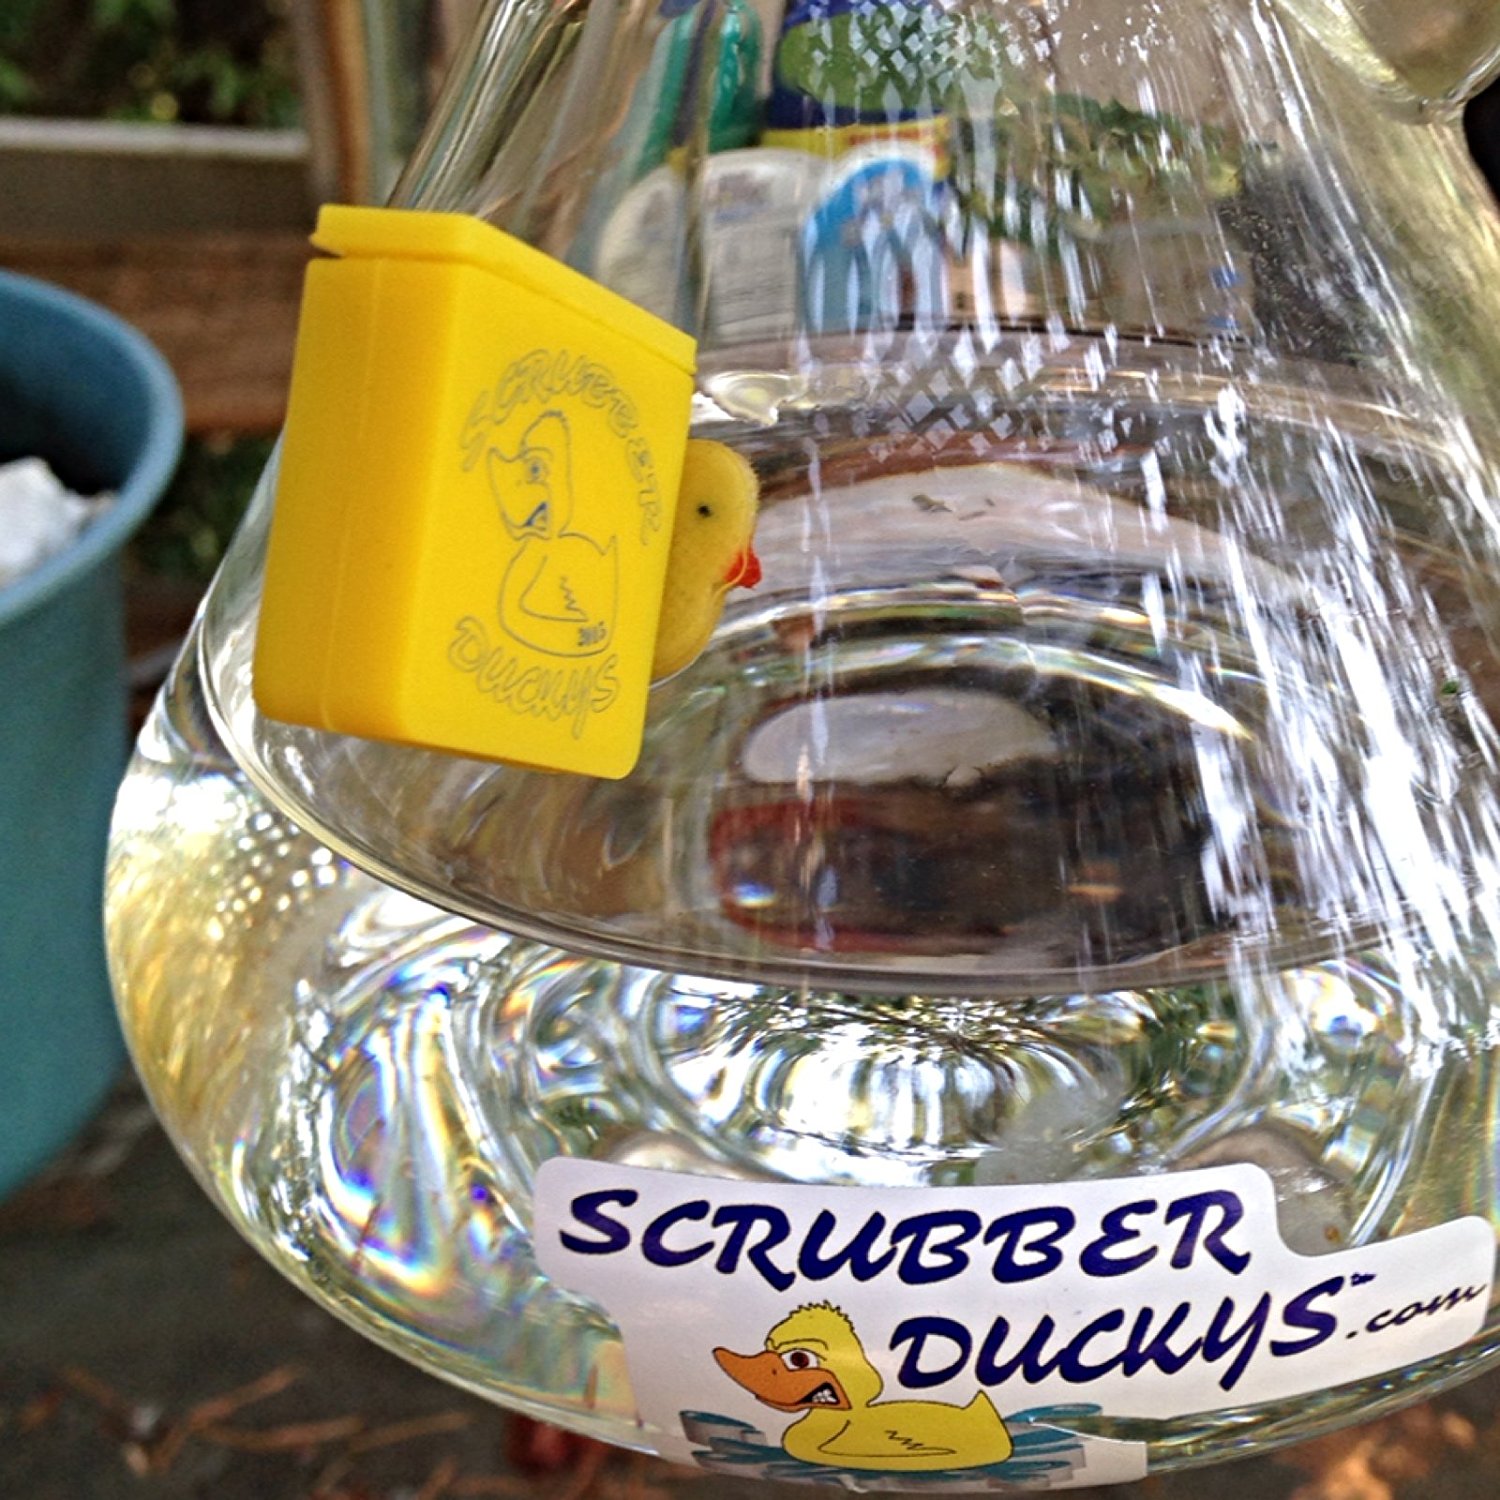 Scrubber Duckys magnetic scrubbers